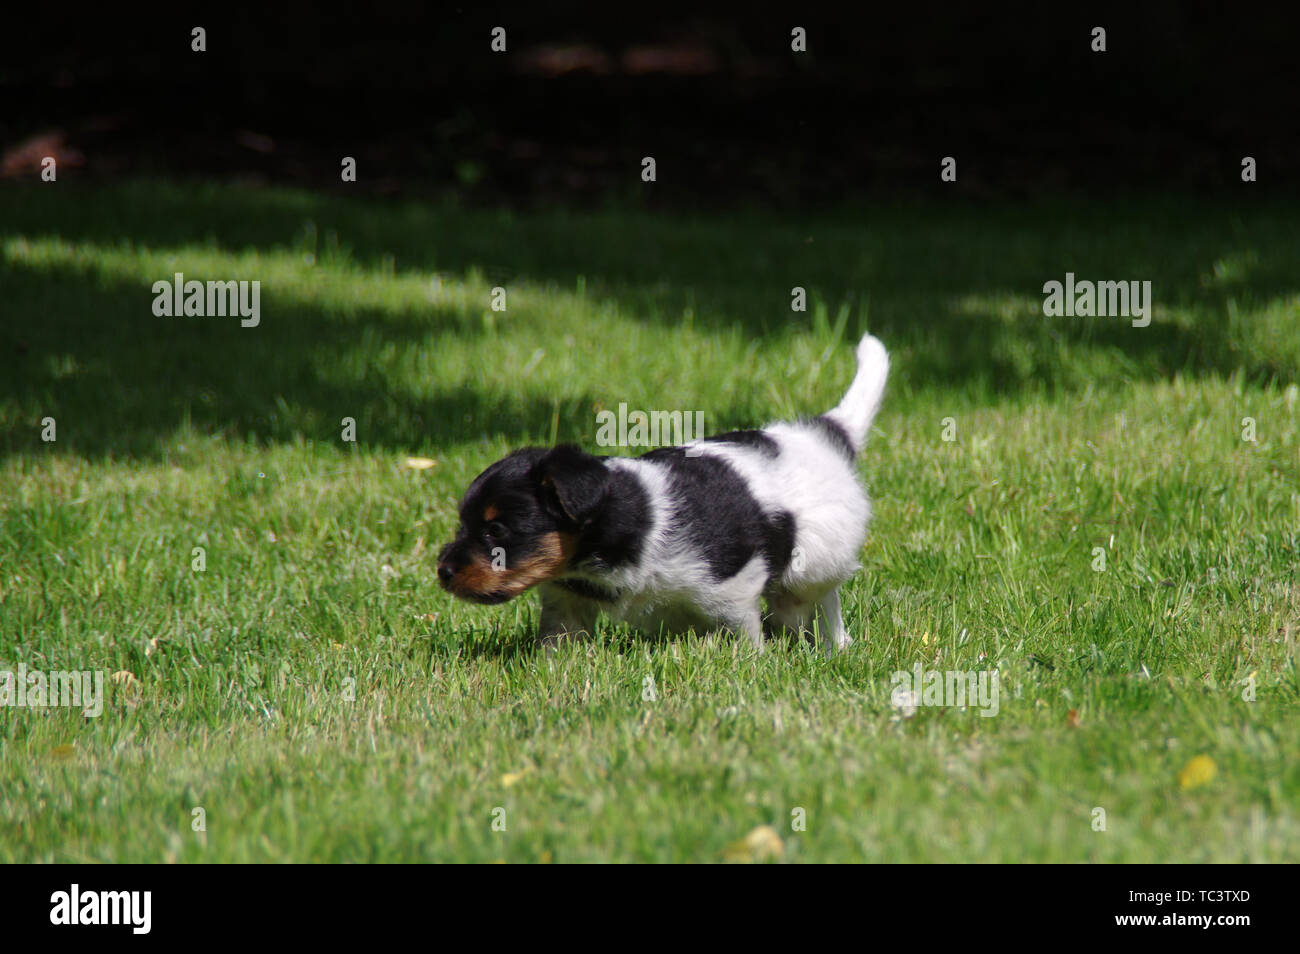 The puppy is walking on the grass. The little dog gets to know the world with curiosity. Stock Photo